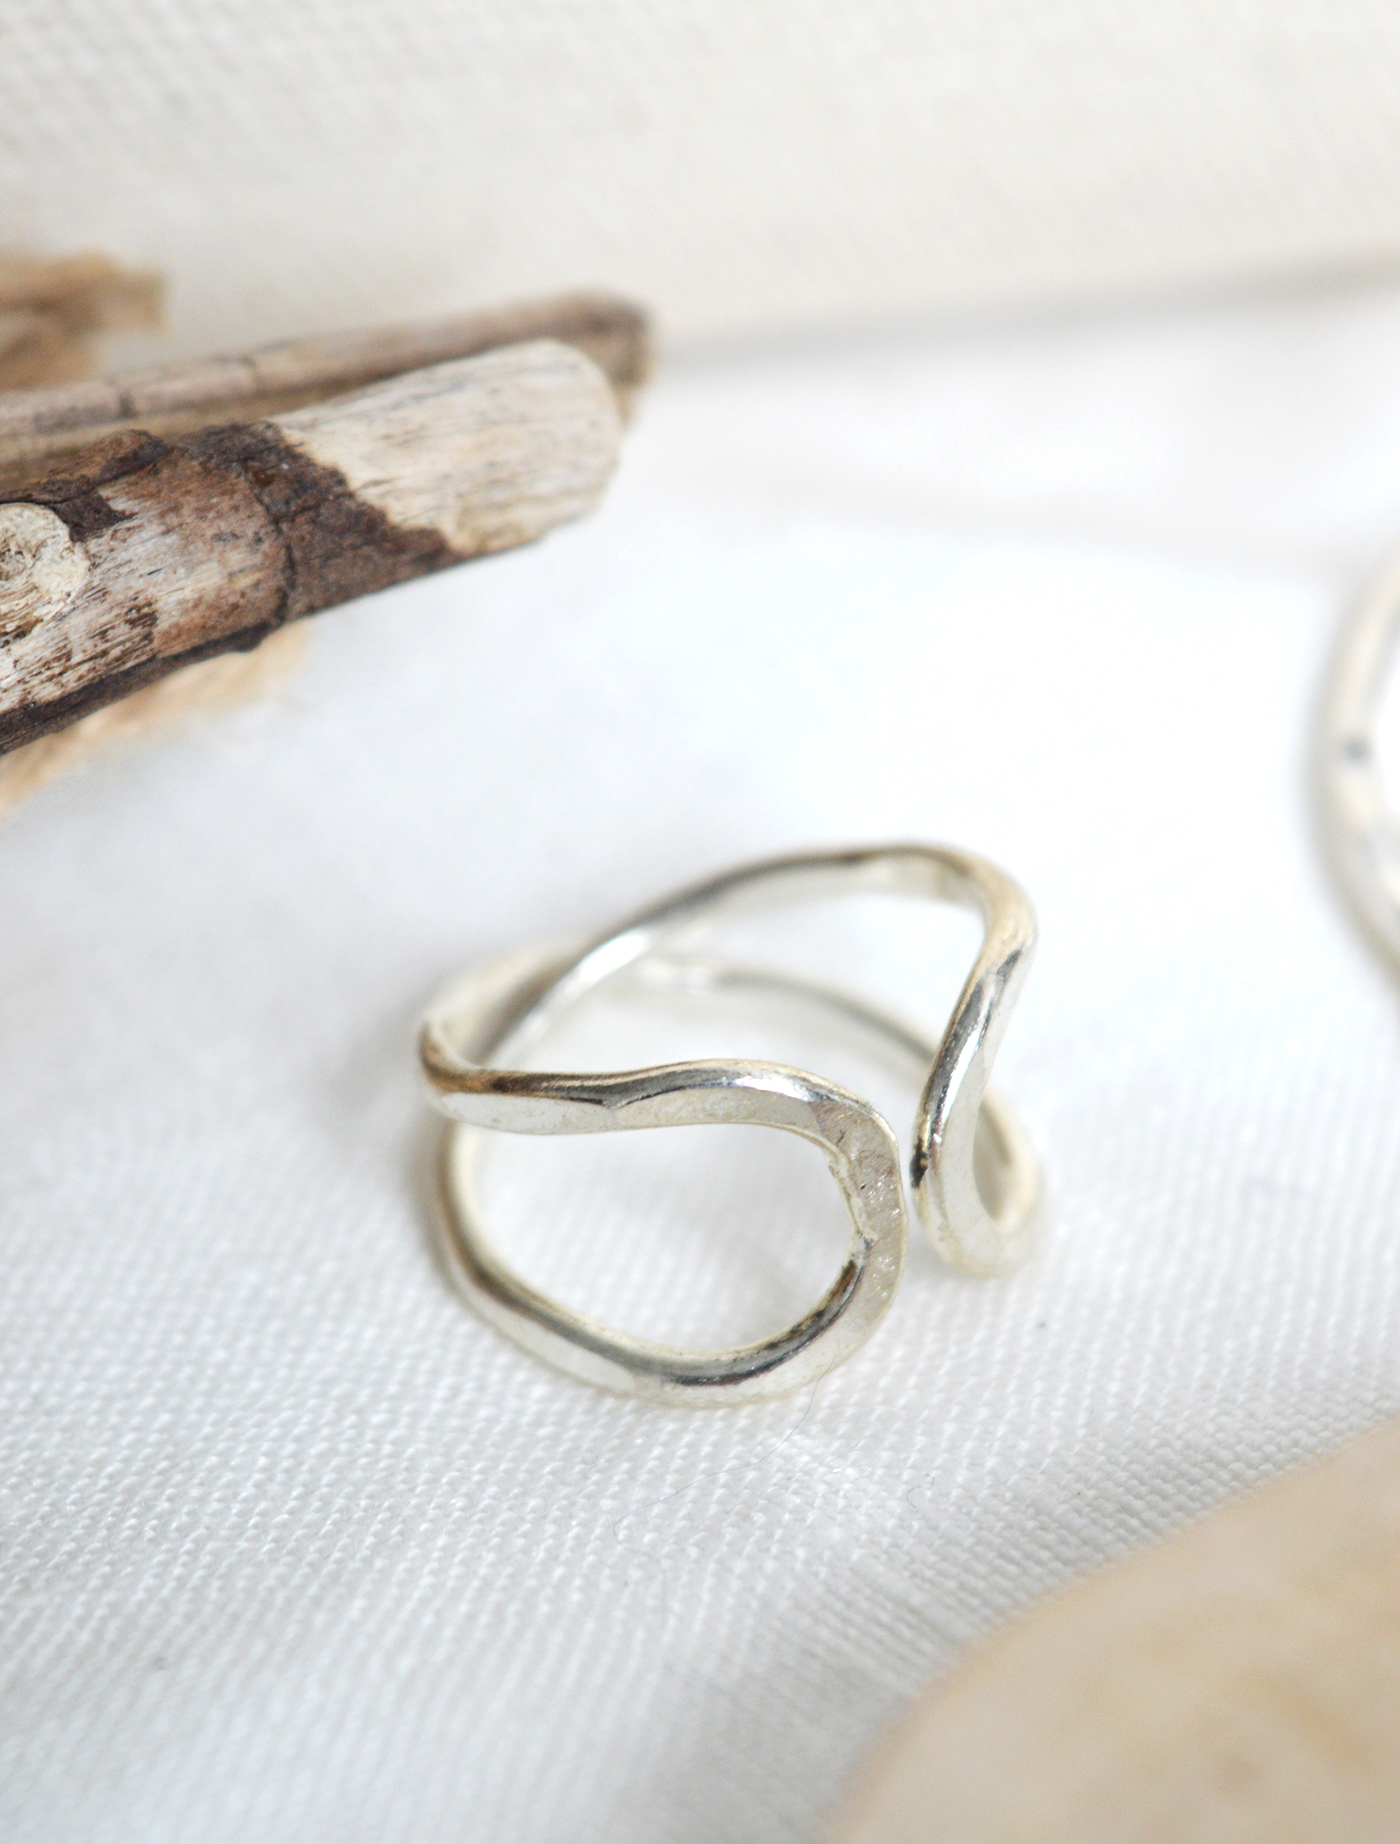 New England lifestyle, home decor interiors,  accessories and furniture for laid back living in modern country, farmhouse and coastal New England styled homes. Hadley Ring